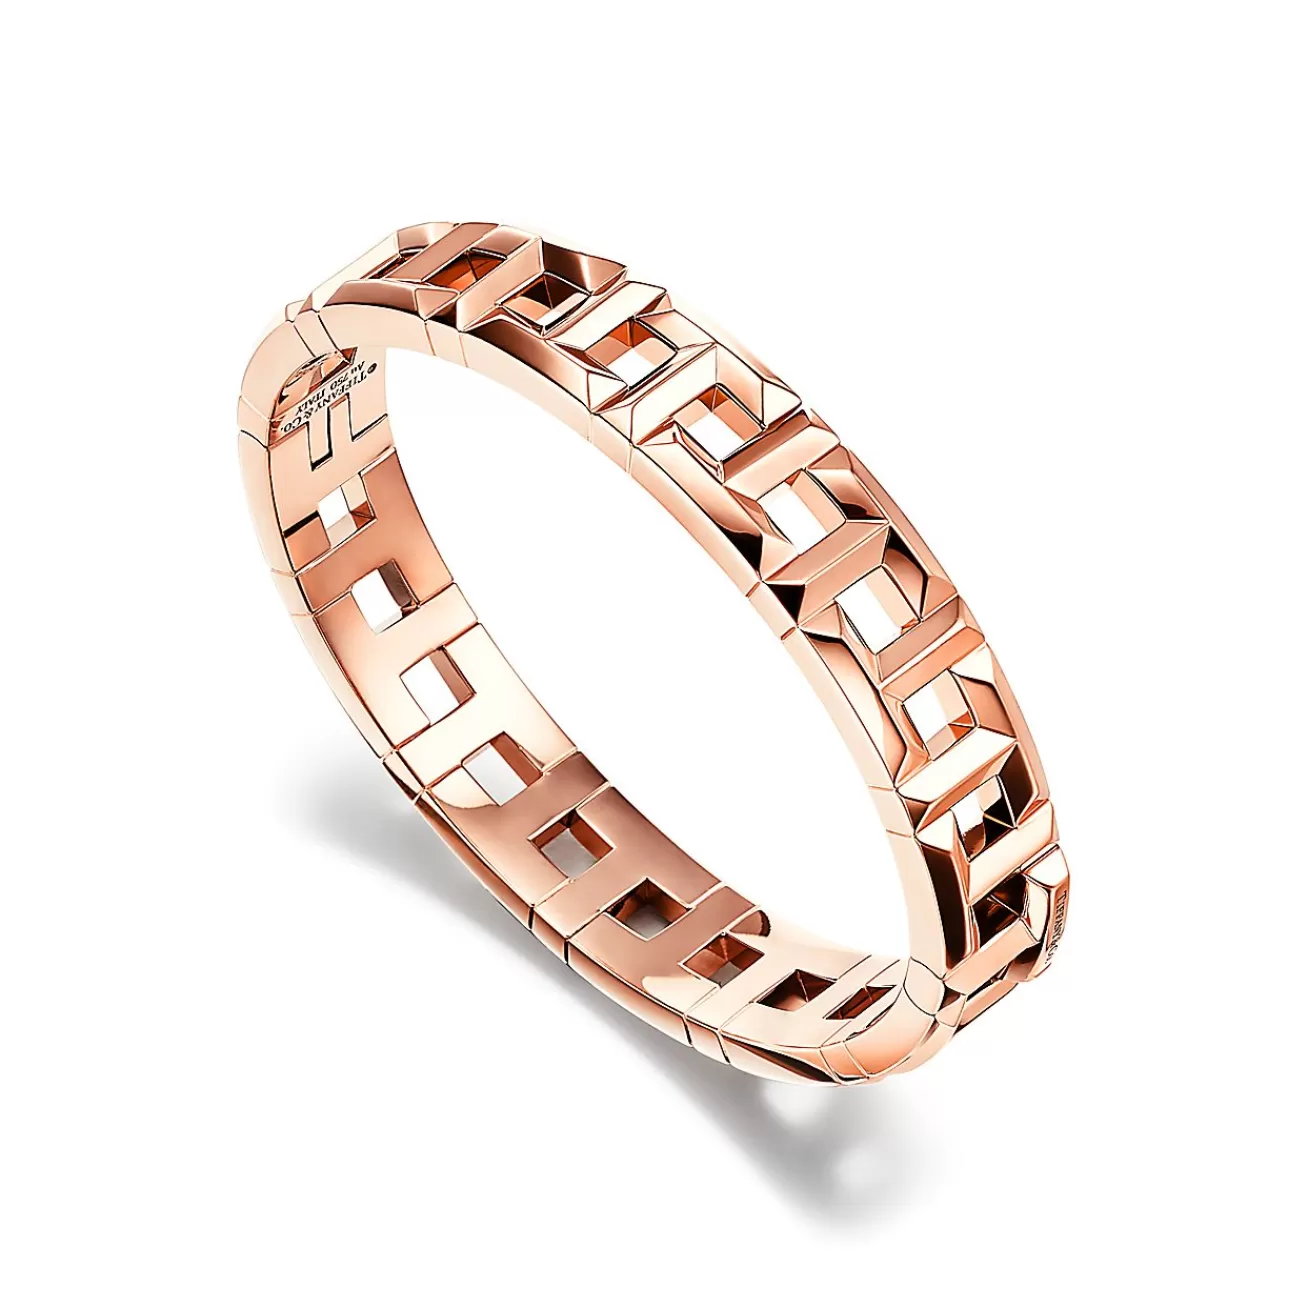 Tiffany & Co. Tiffany T True wide hinged bangle in 18k rose gold, large. | ^ Rose Gold Jewelry | Tiffany T